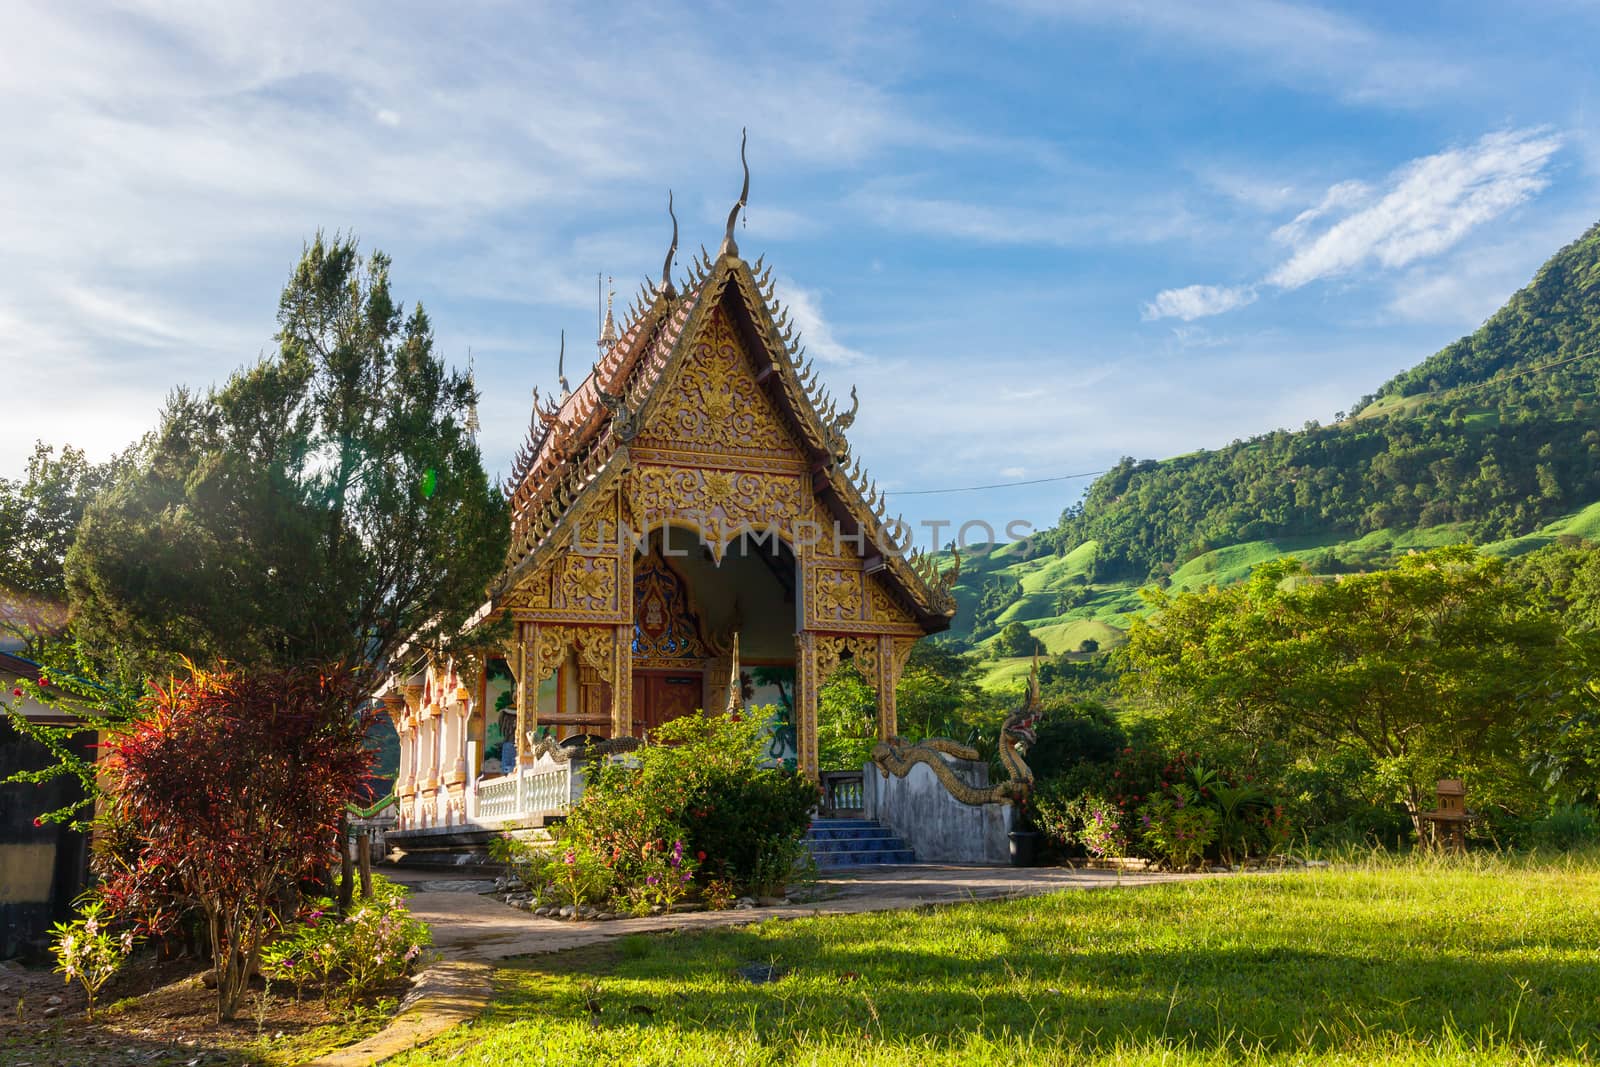 Temple in thailand near mountain valley during sunrise Natural s by nopparats